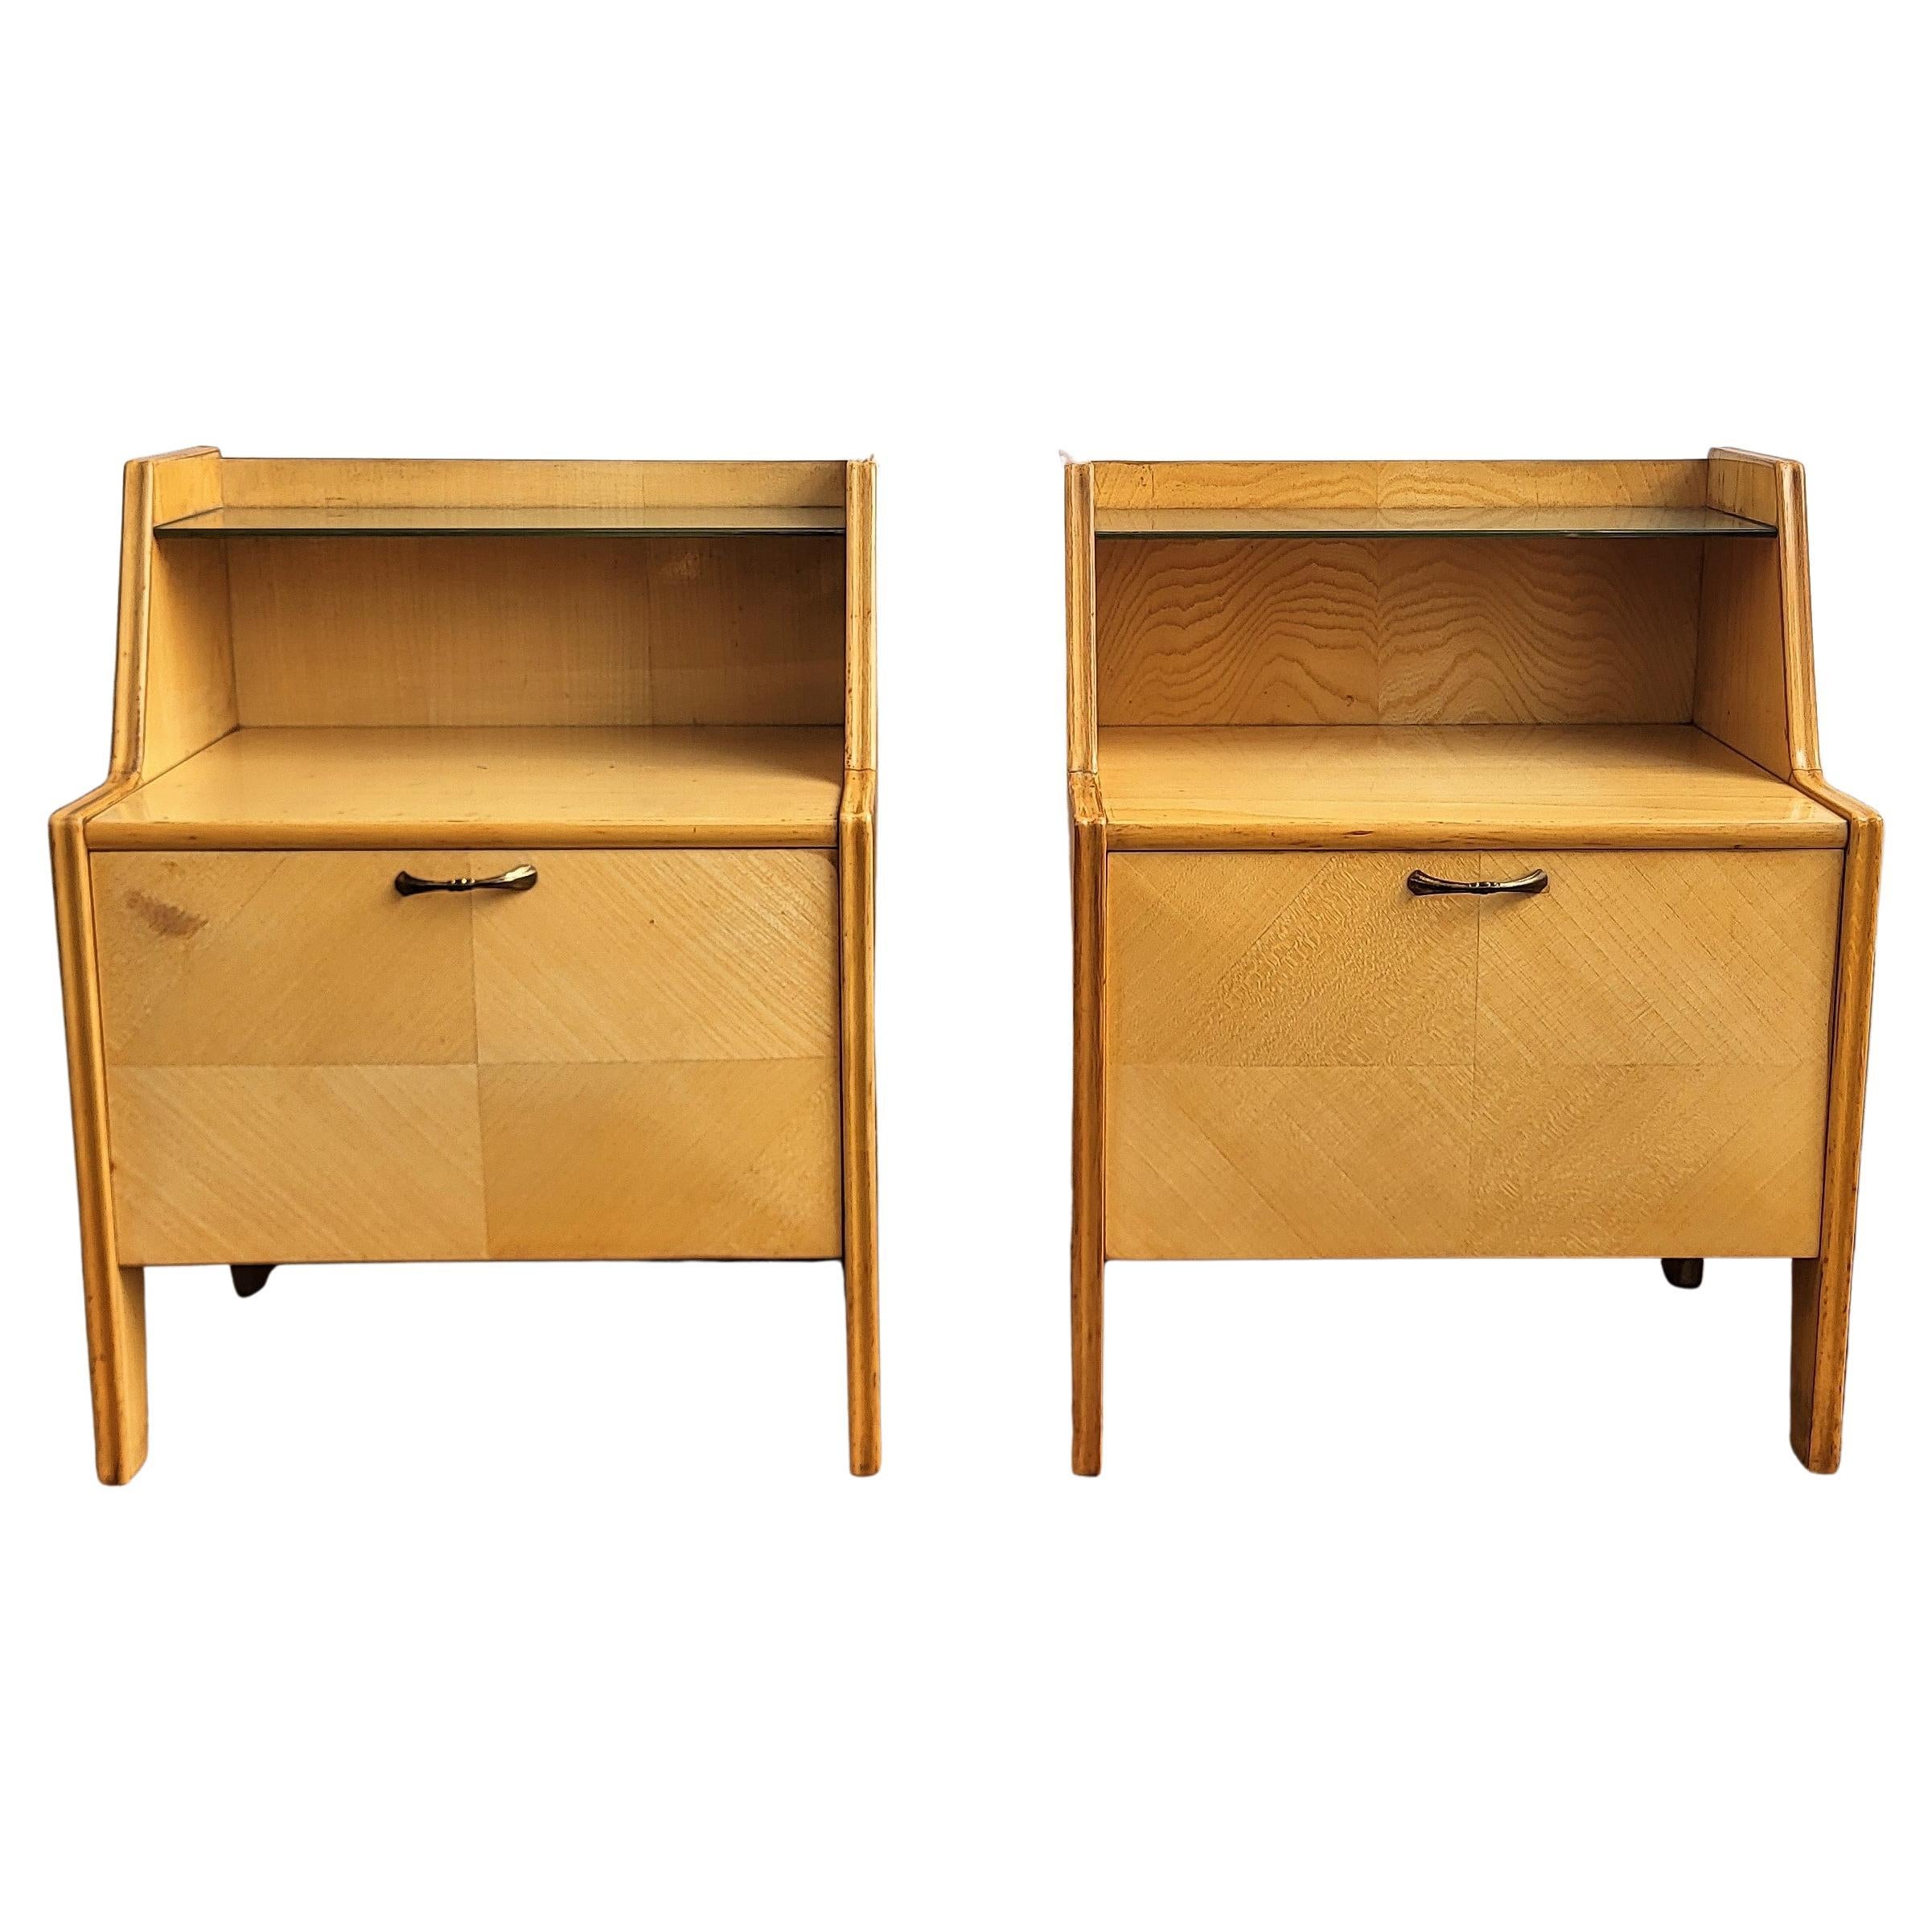 Pair of Italian Mid-Century Modern Nightstands Bedside Tables Maple & Glass Top For Sale